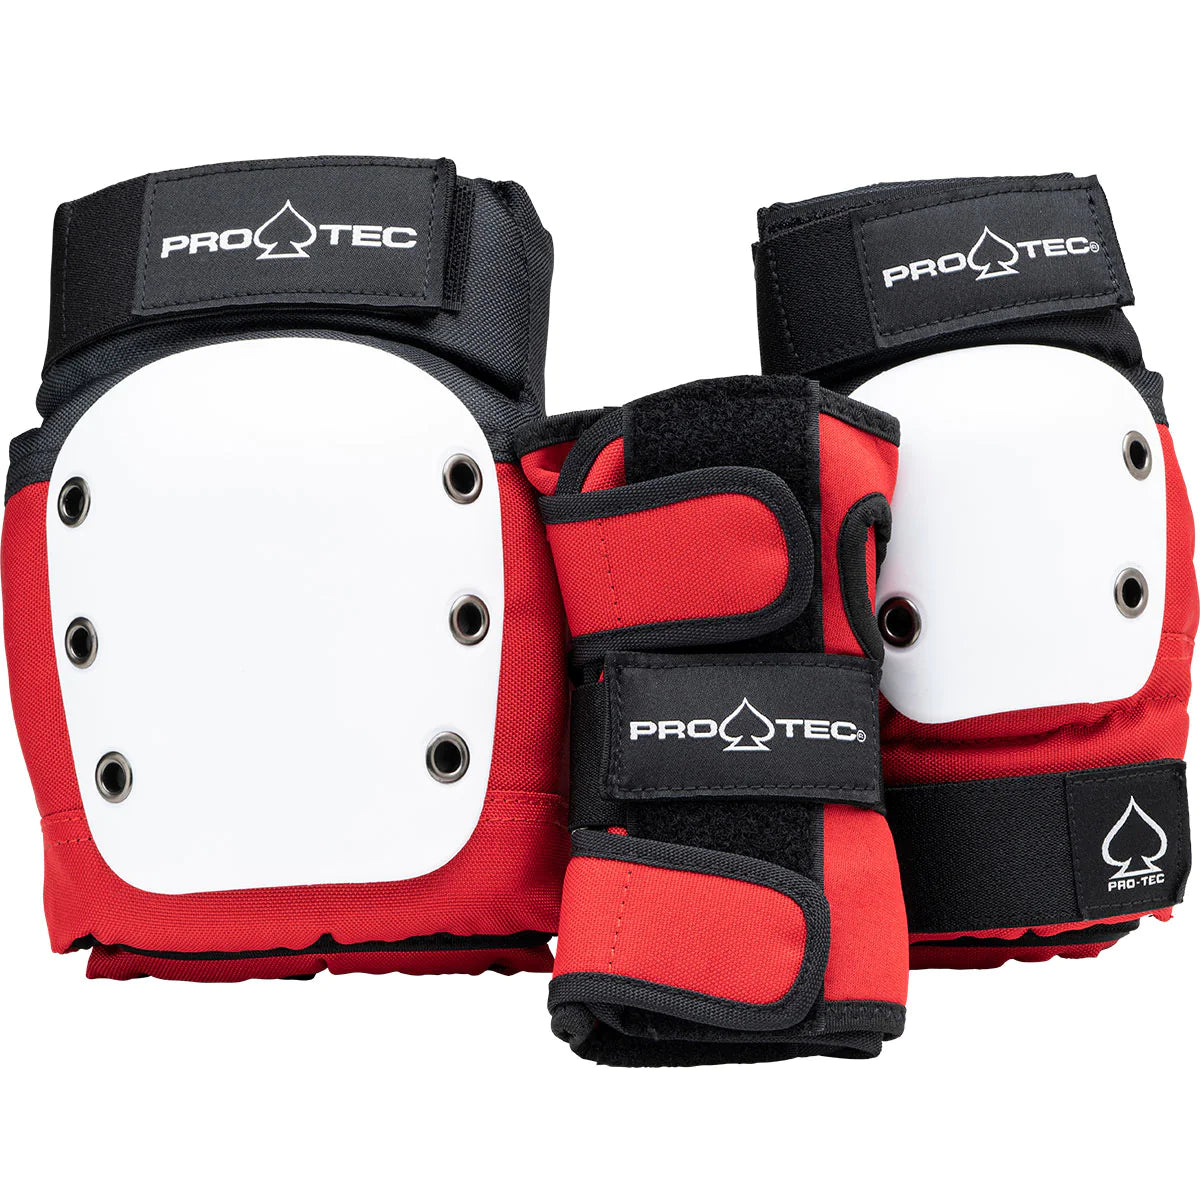 Pro Tec Street Gear JR 3 Pack (size & color options listed)